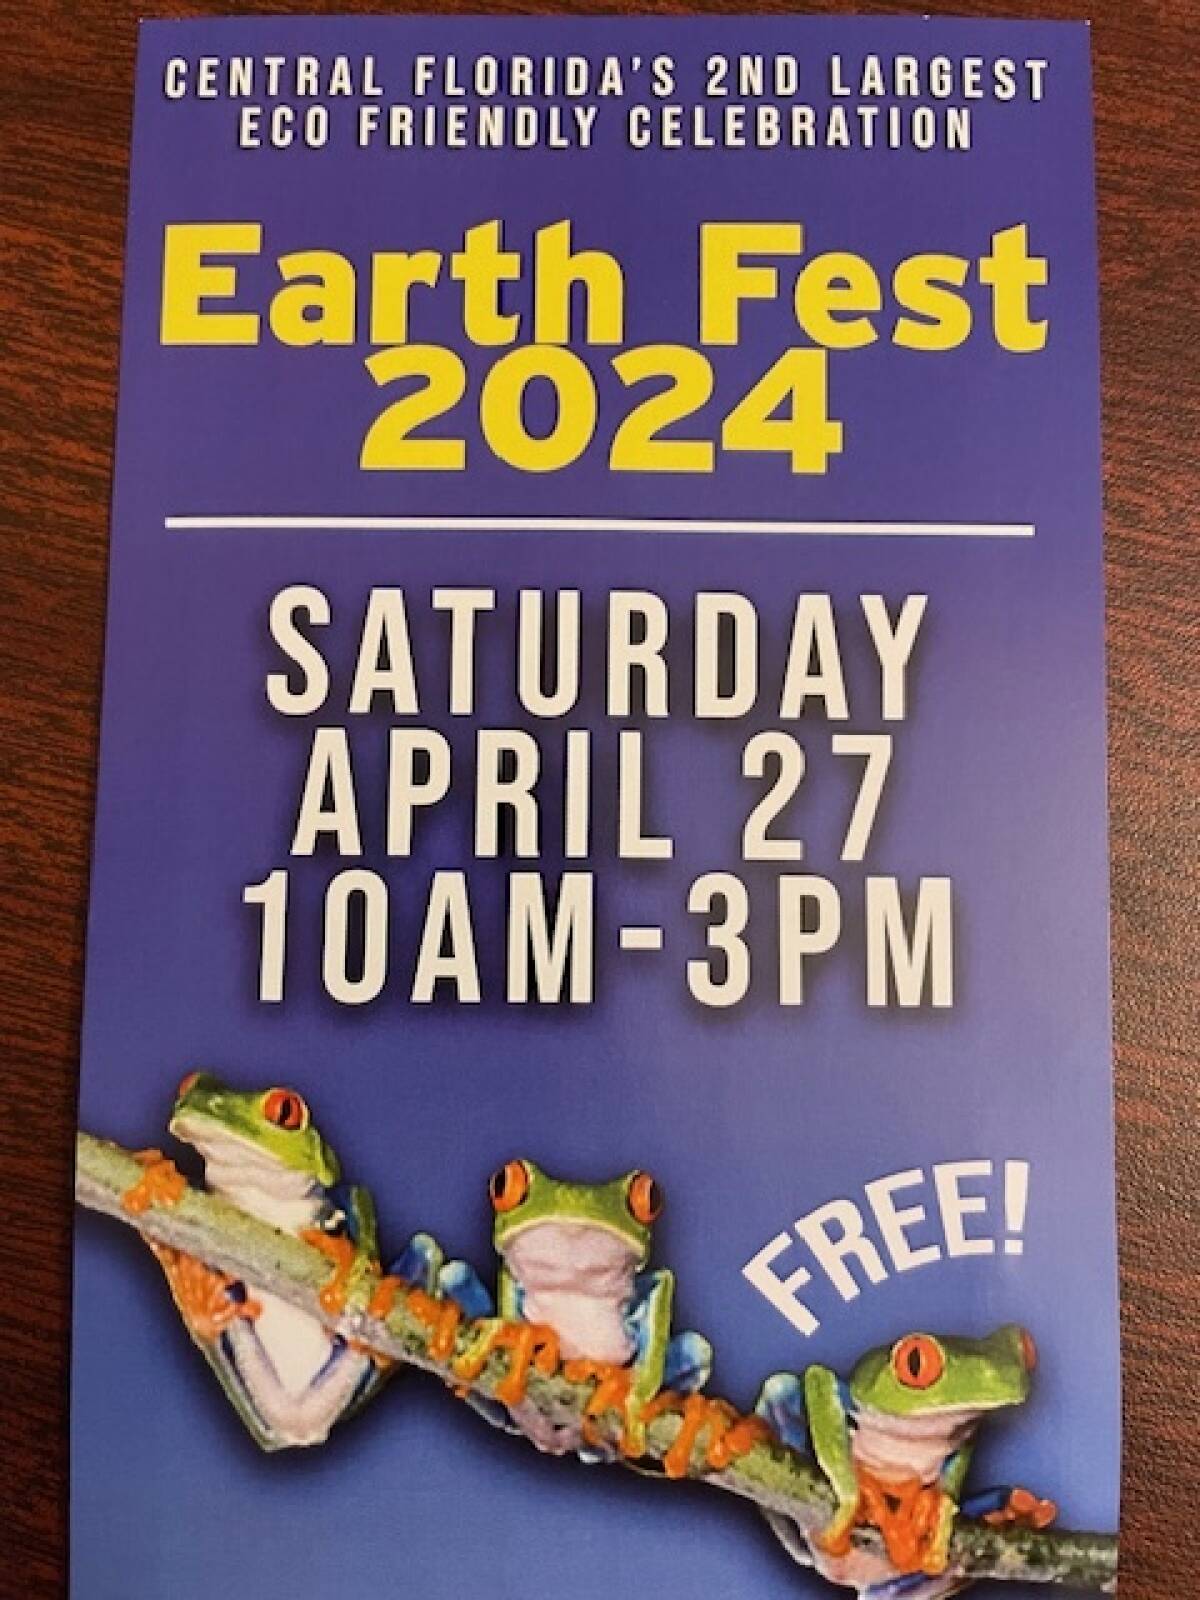 Casselberry's Earth Fest 2024